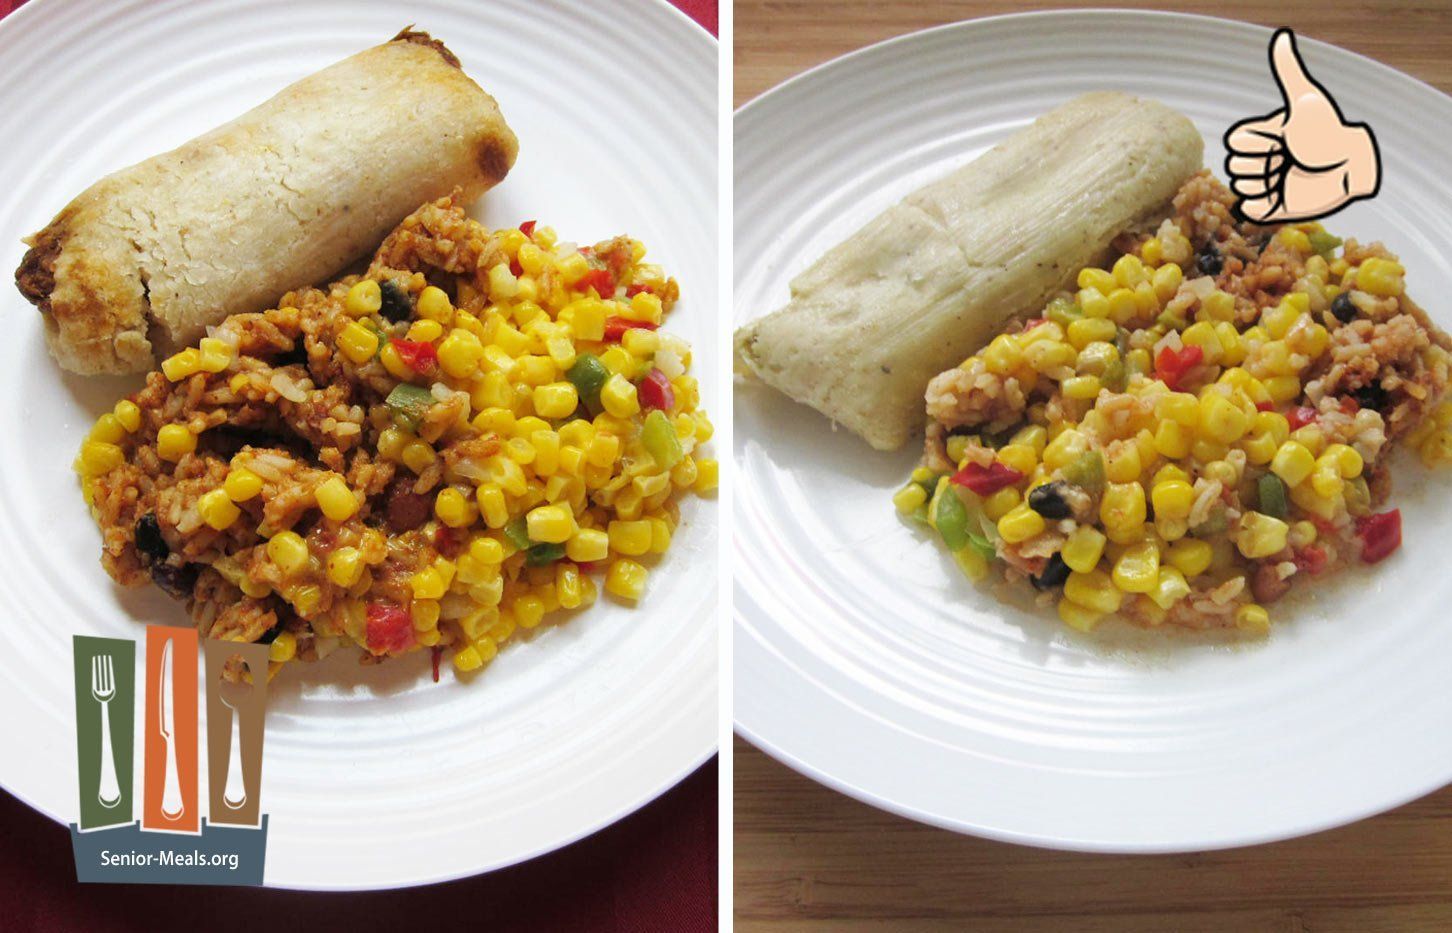 Cheese and Green Chile Tamale - Delicious Then and Now! This Meal Remains Unchanged, Which is Great, Because All You Can Do is Mess it Up.